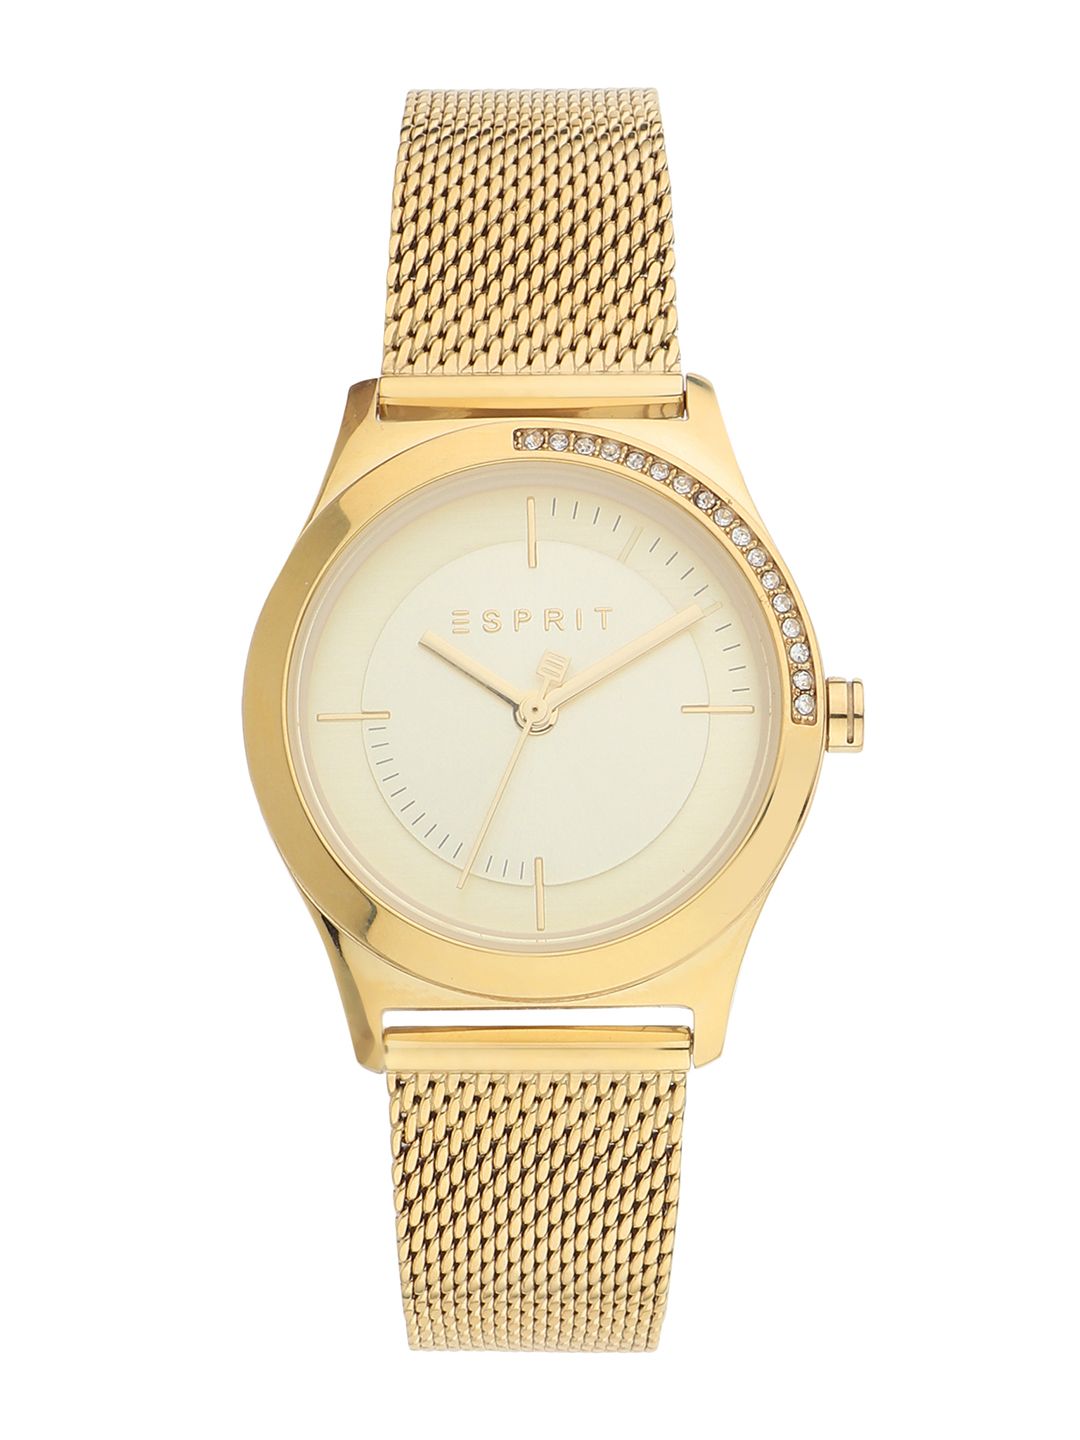 ESPRIT Women Gold-Toned Solid Analogue Watch ES1L116M0075 Price in India